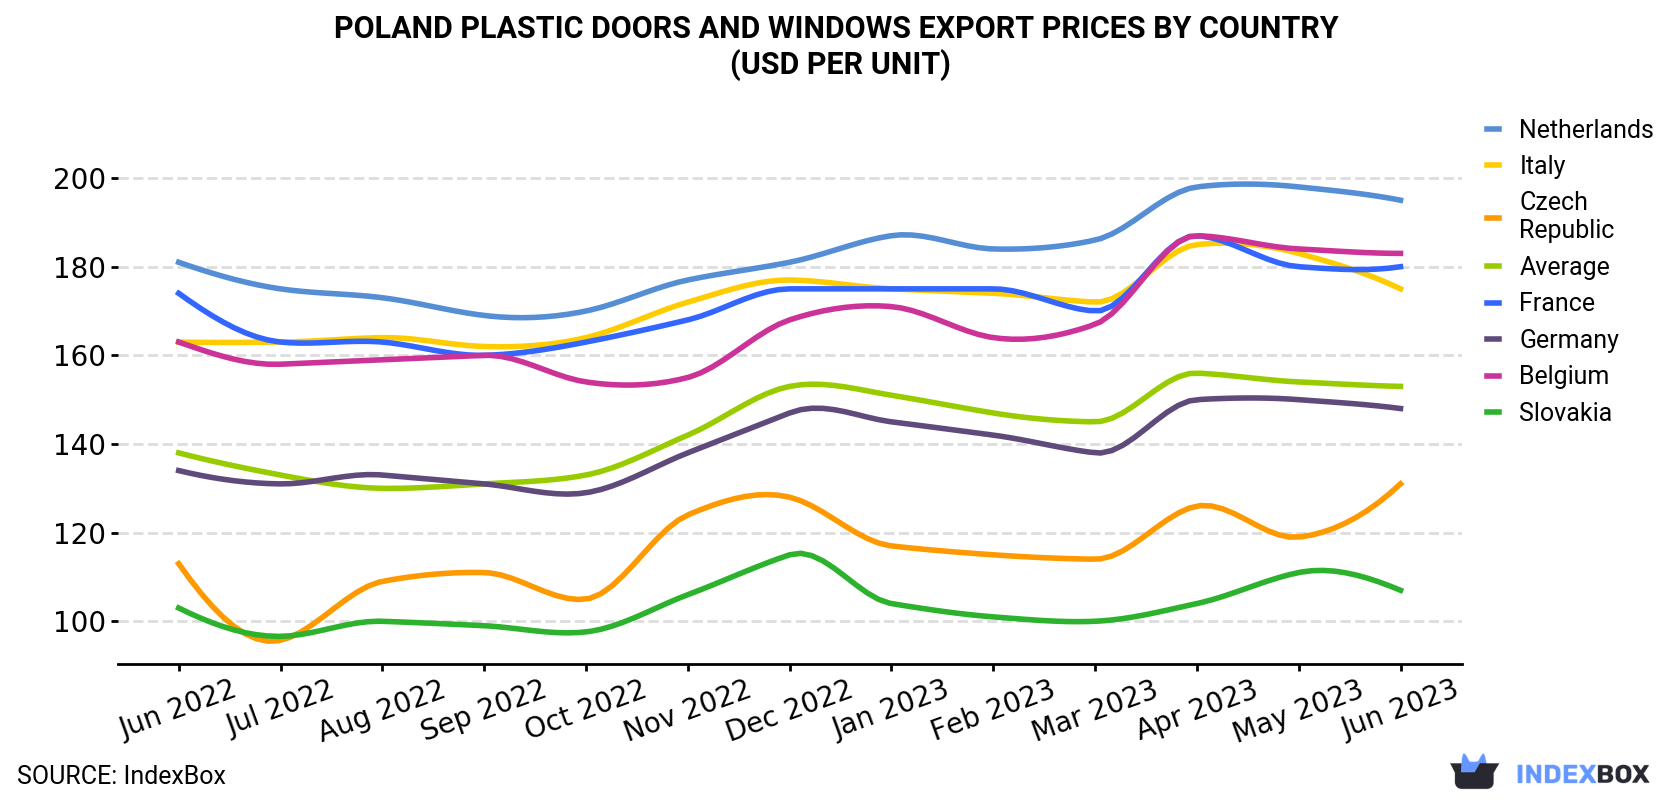 Poland Plastic Doors And Windows Export Prices By Country (USD Per Unit)